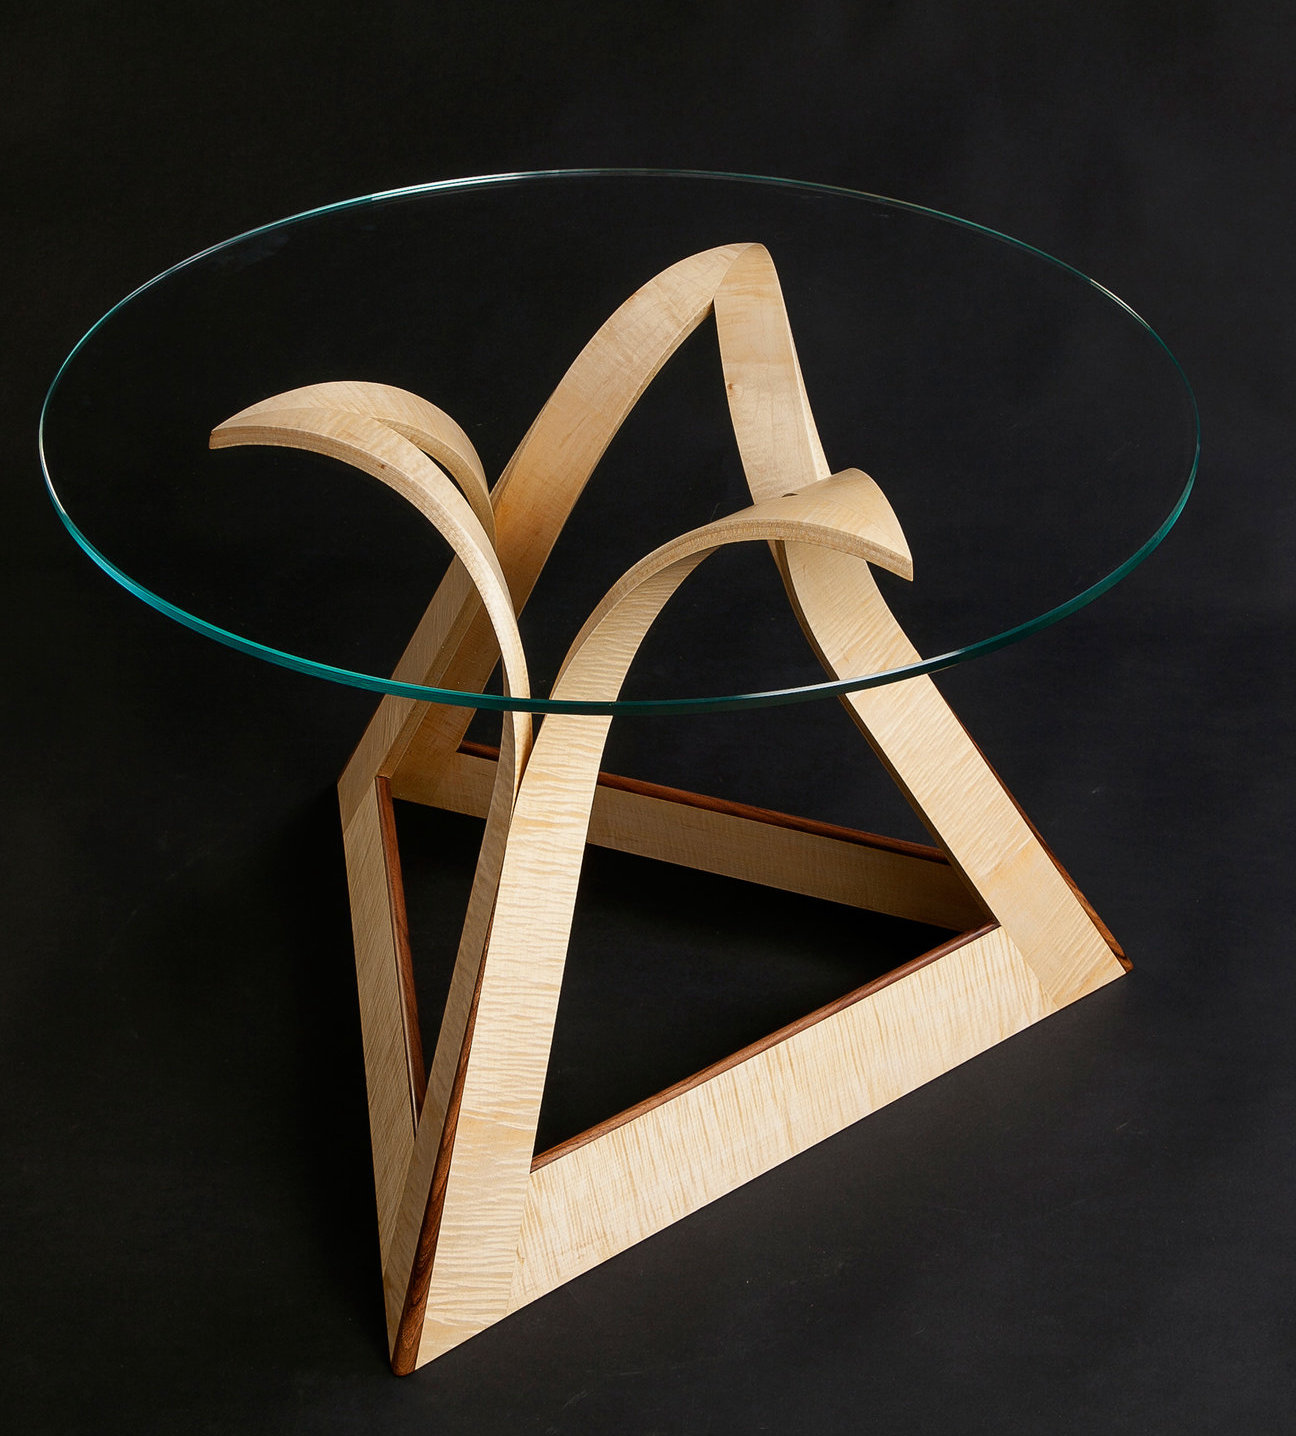 Huw Edwards Jones, a Vesuvius coffee table. Solid ripple sycamore and English walnut with a circular glass top. Base inset with a craft gilt mark numbered 272 for excellence in construction and design from The Worshipful